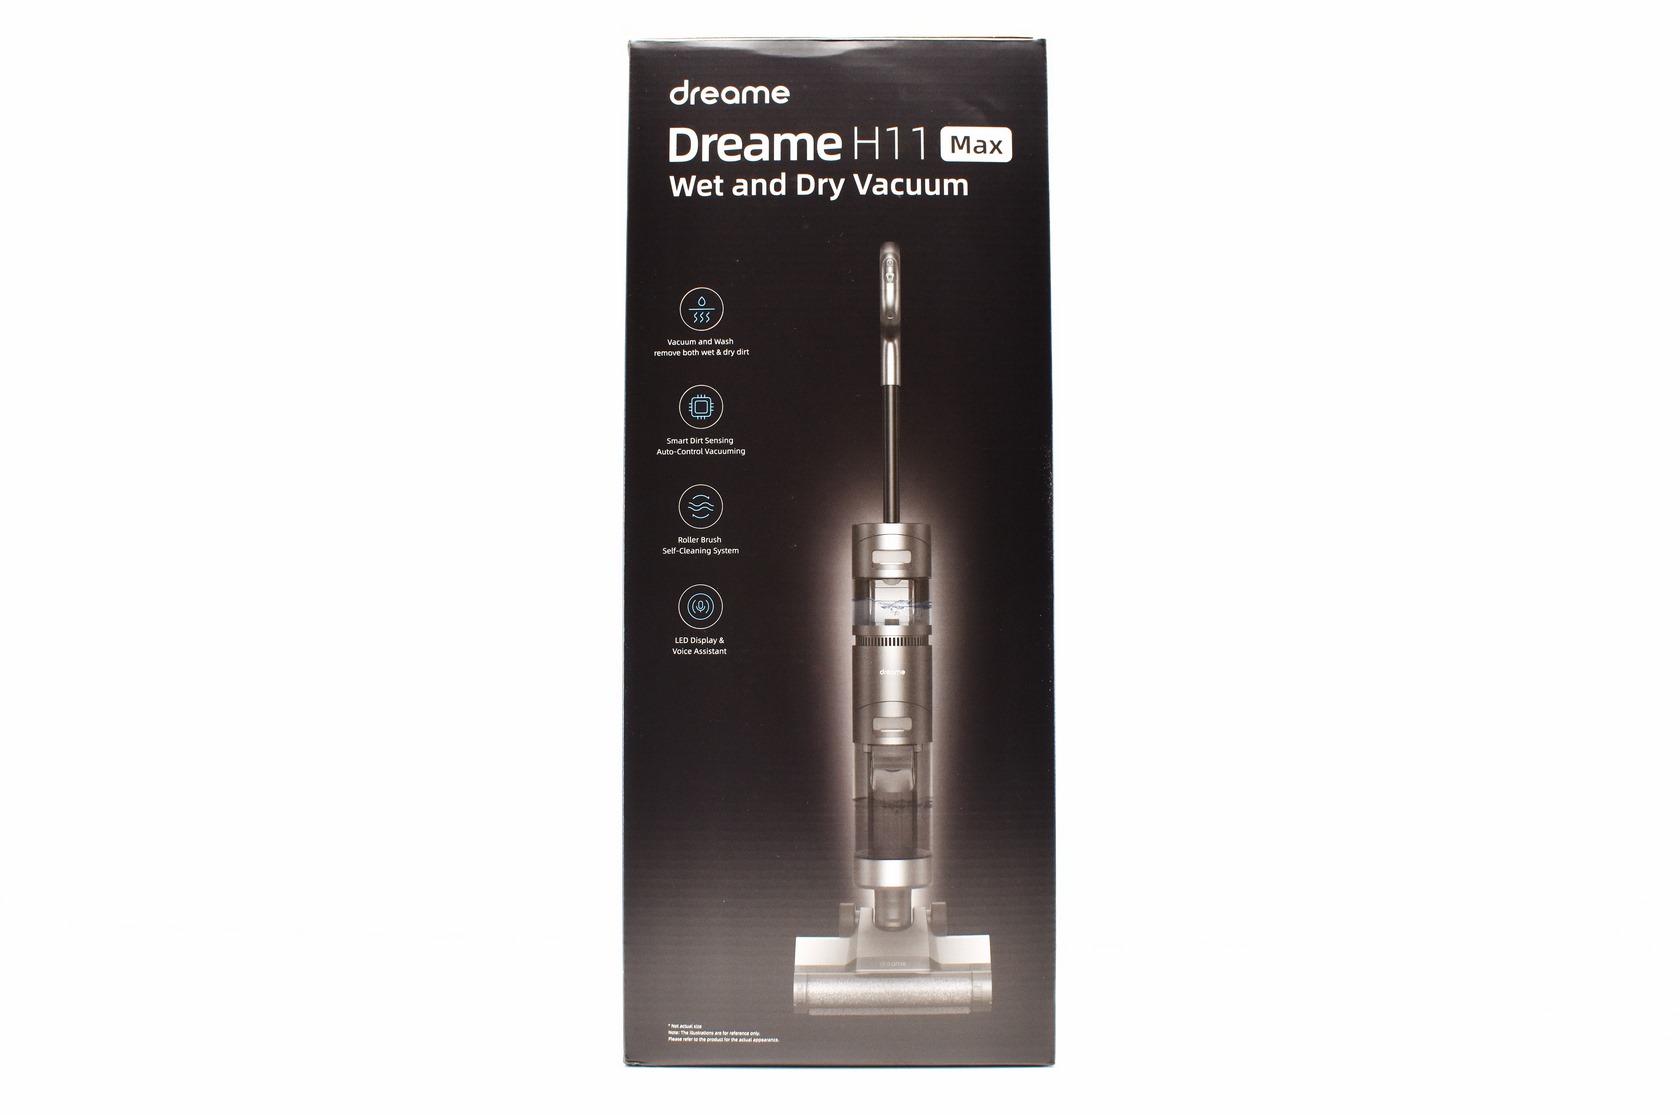 Dreame H11 Max Wet and Dry vacuum review - finally a mopping vacuum that  works! - The Gadgeteer